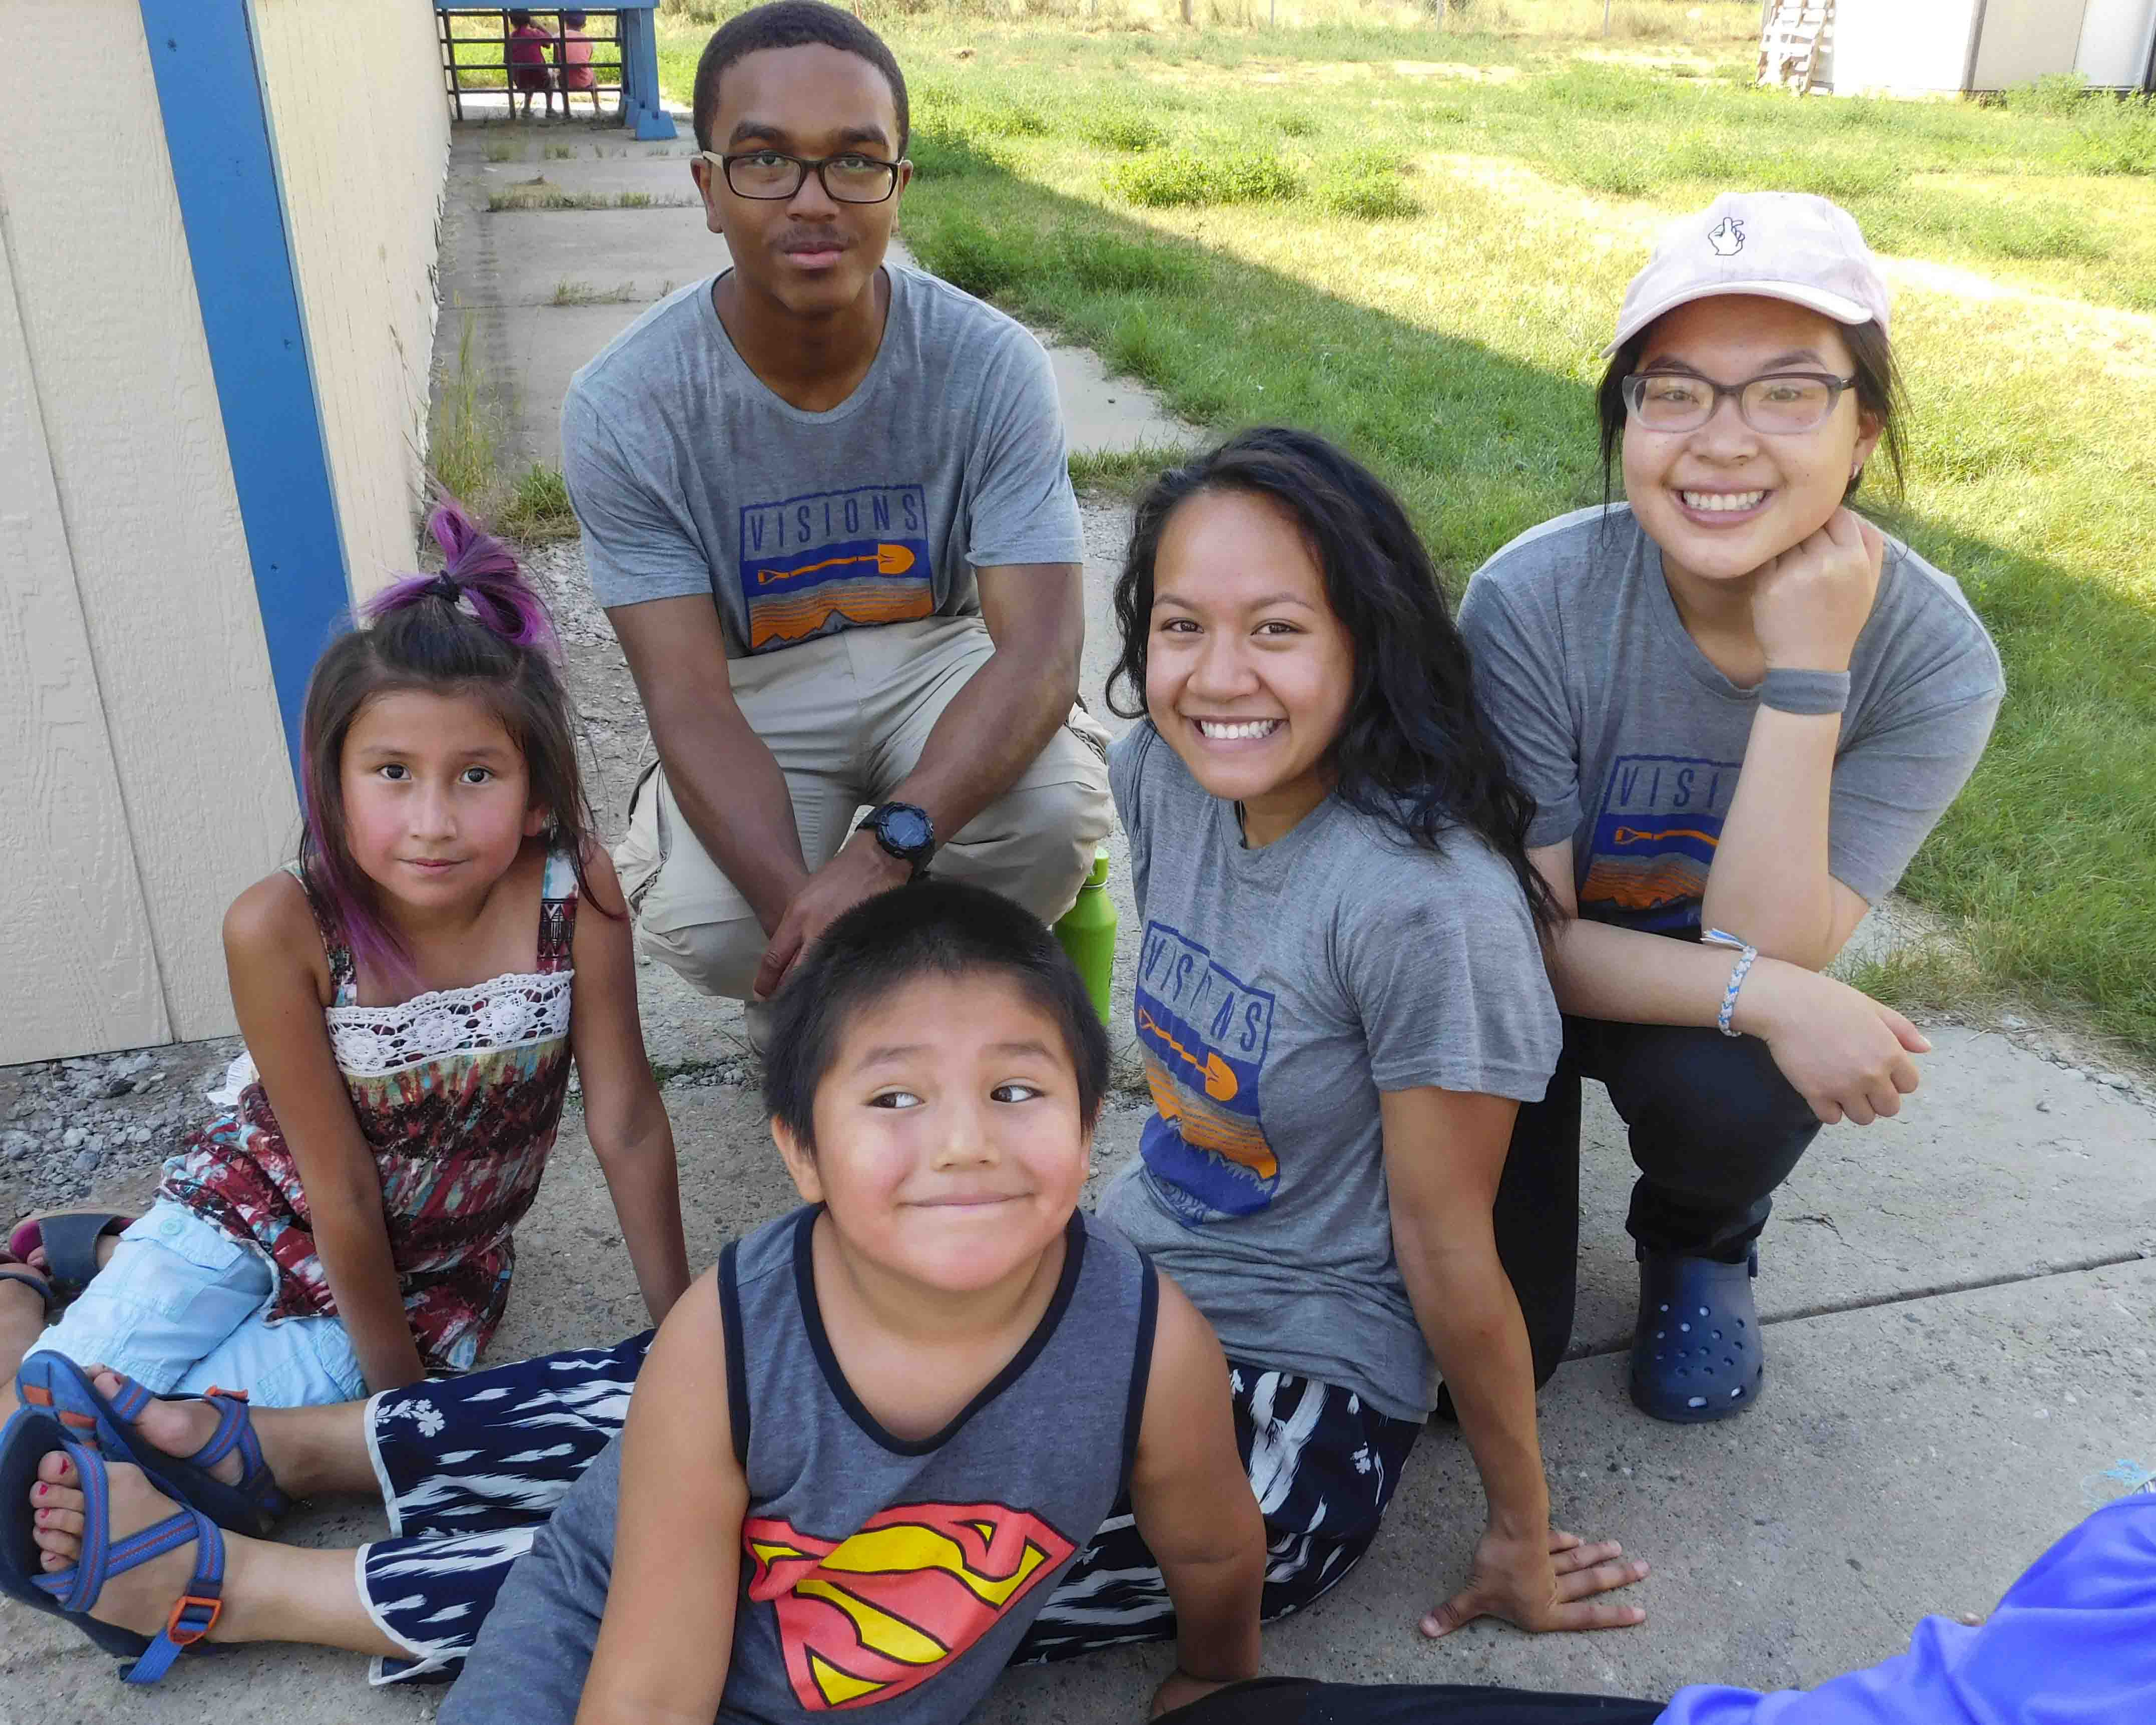 Teen volunteers sit in the shade with local kids on community service trips to the Northern Cheyenne